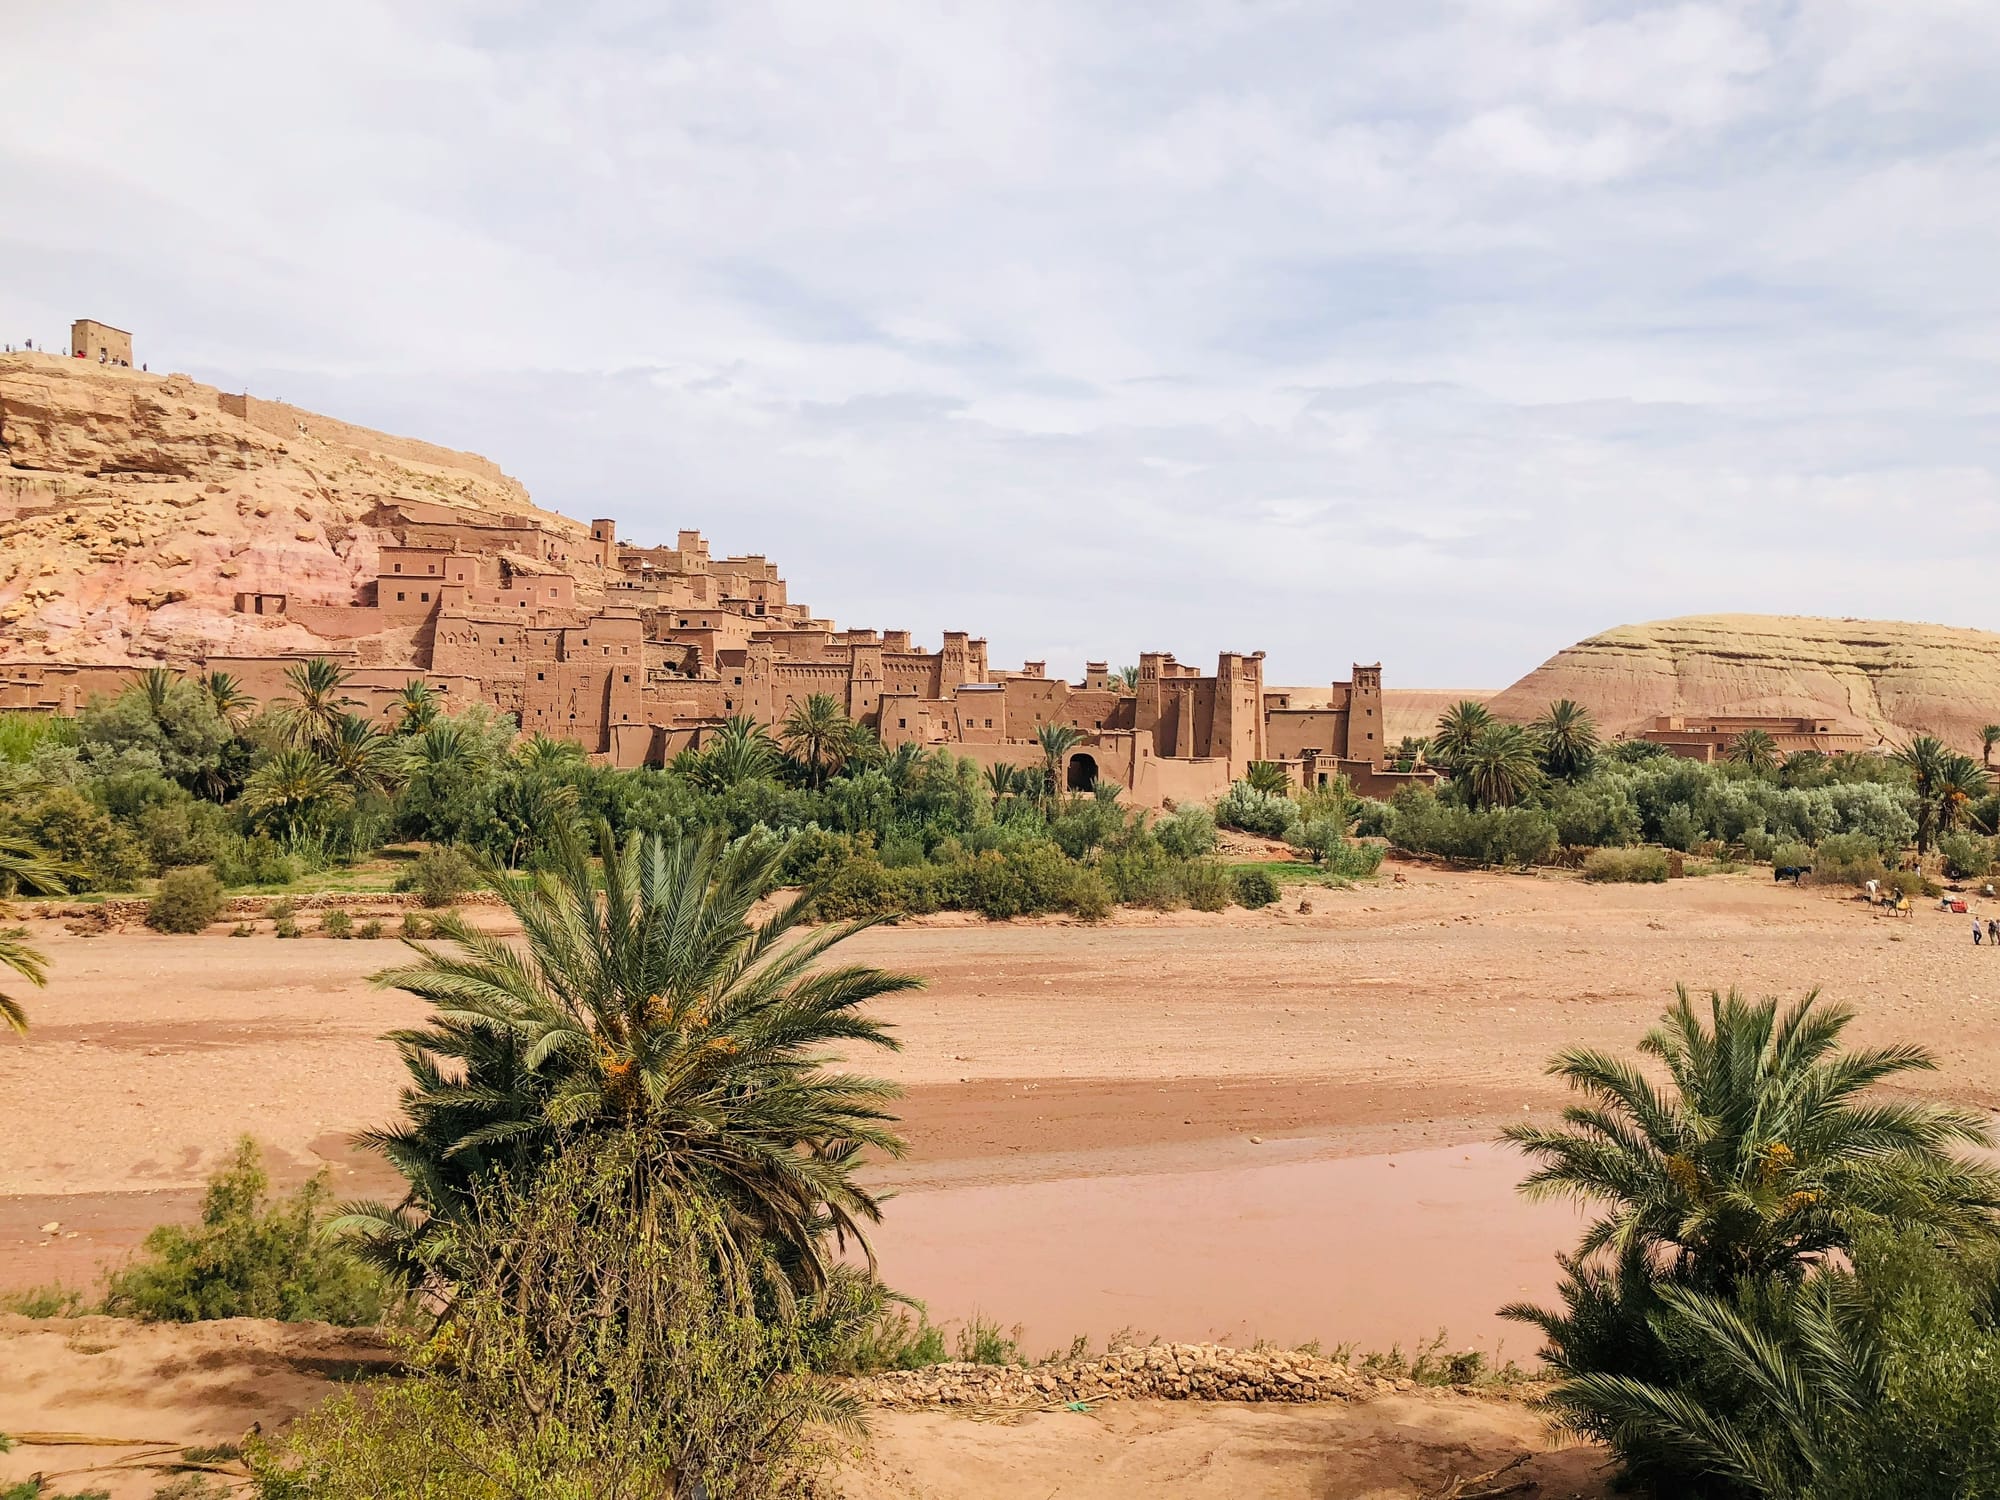 A look at Ait Benhaddou, Morocco from outside